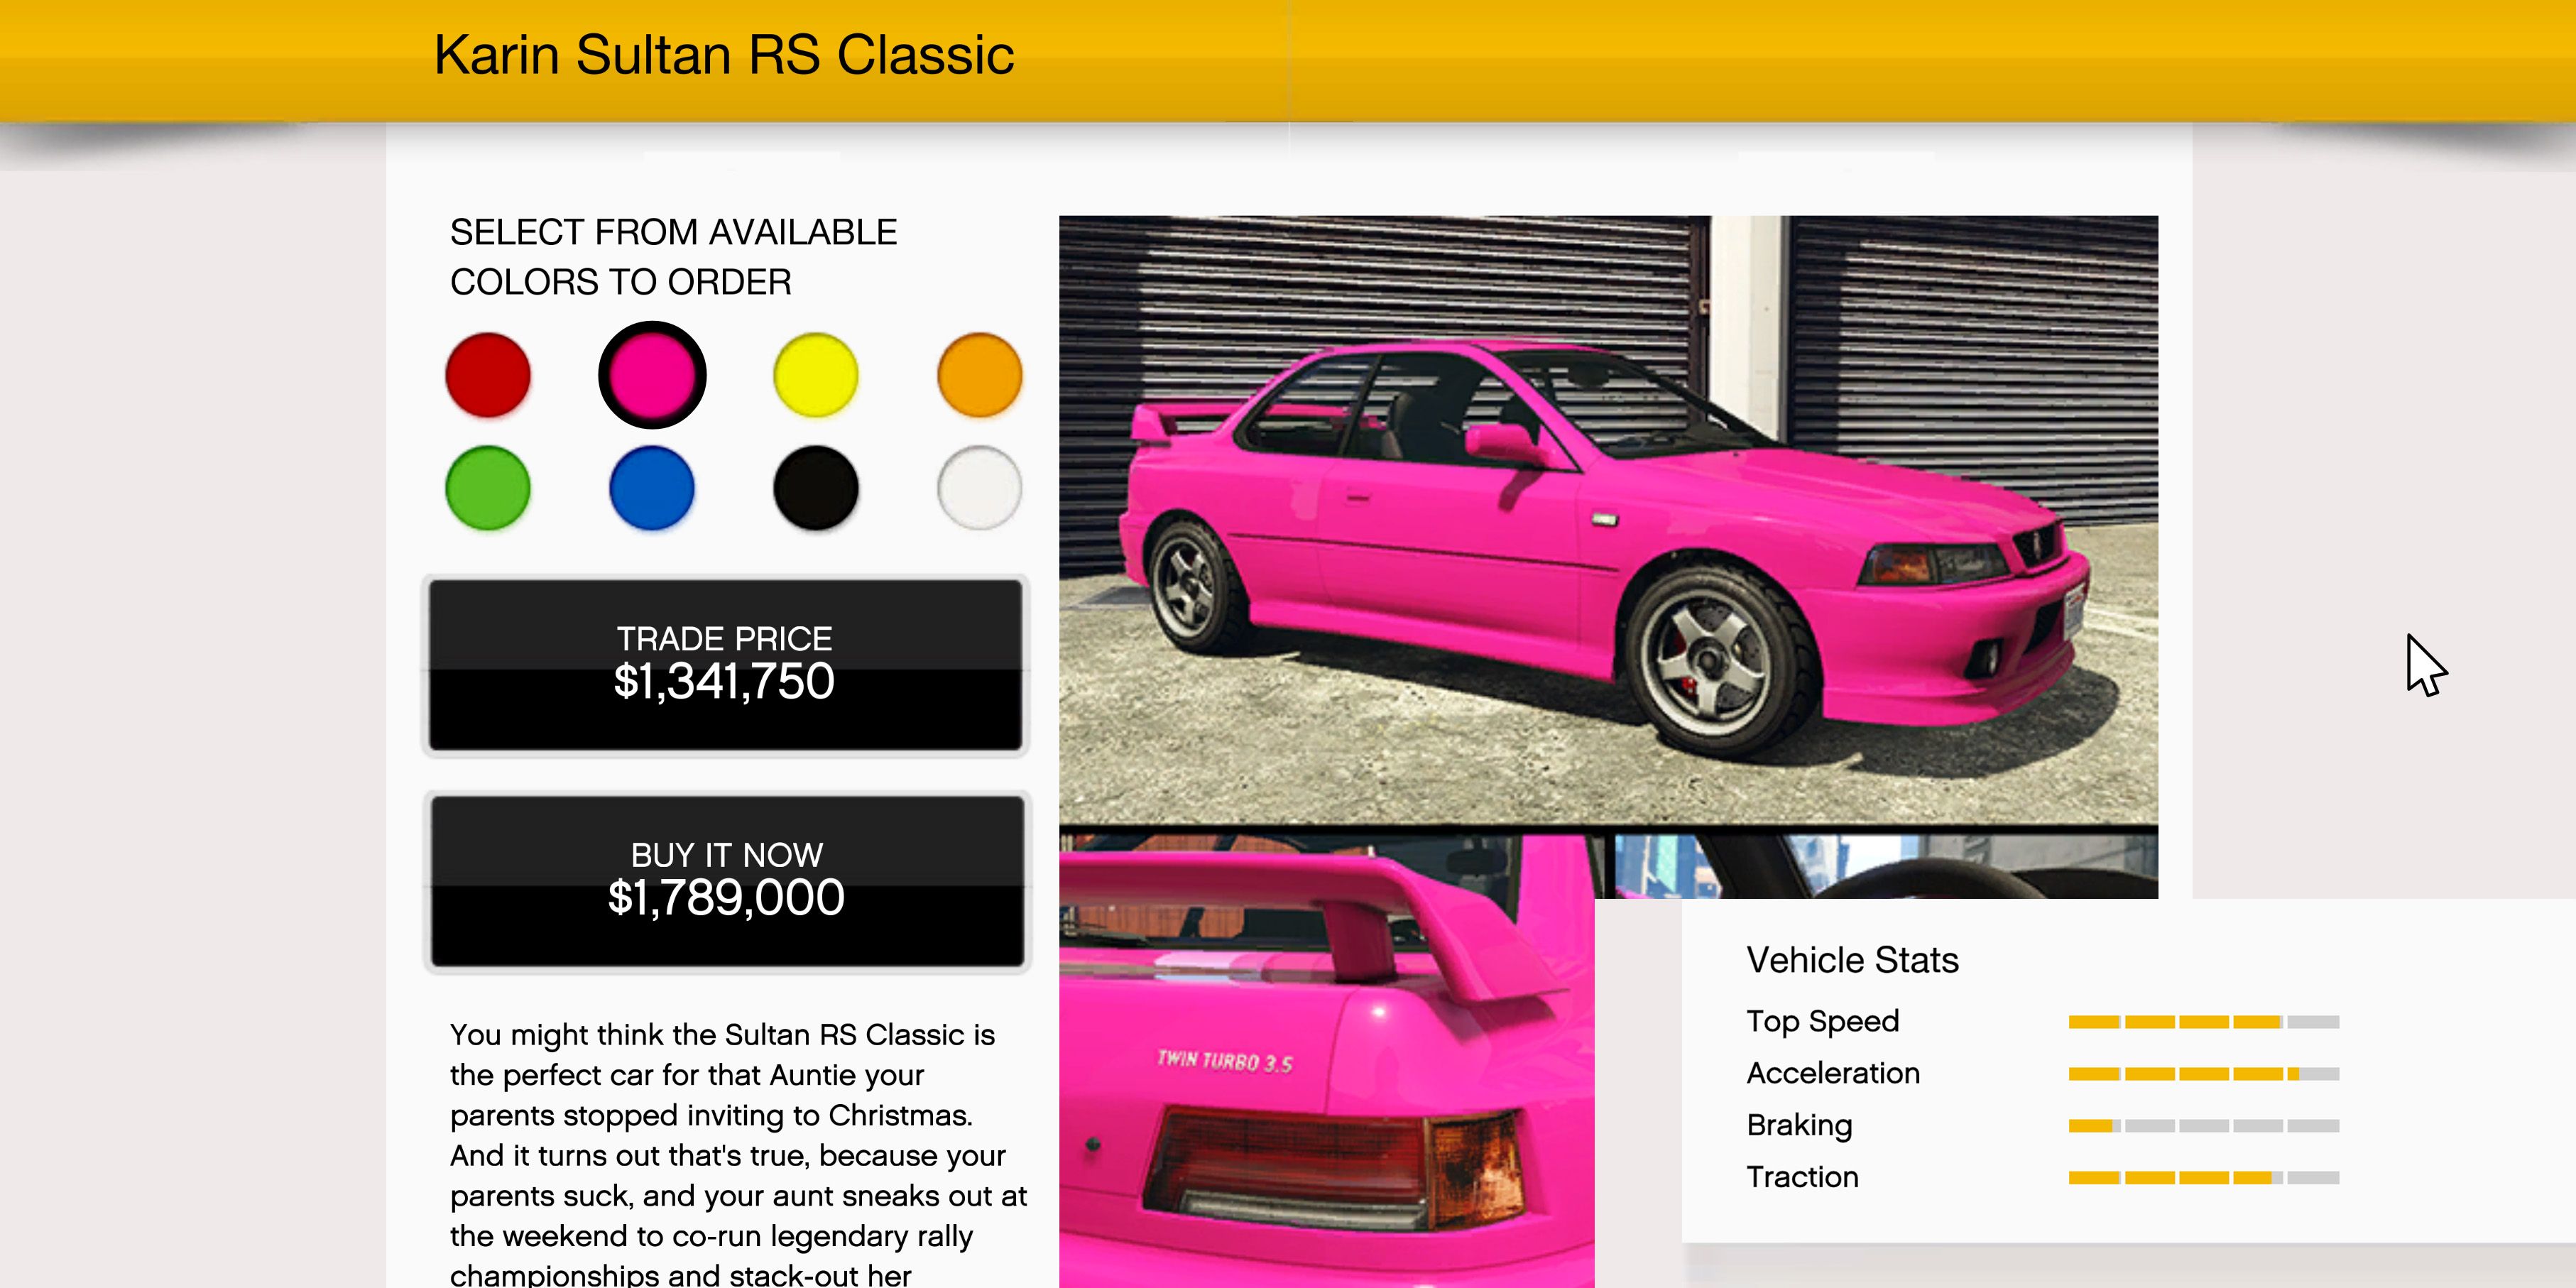 Karin Sultan RS Classic for sale in GTA Online